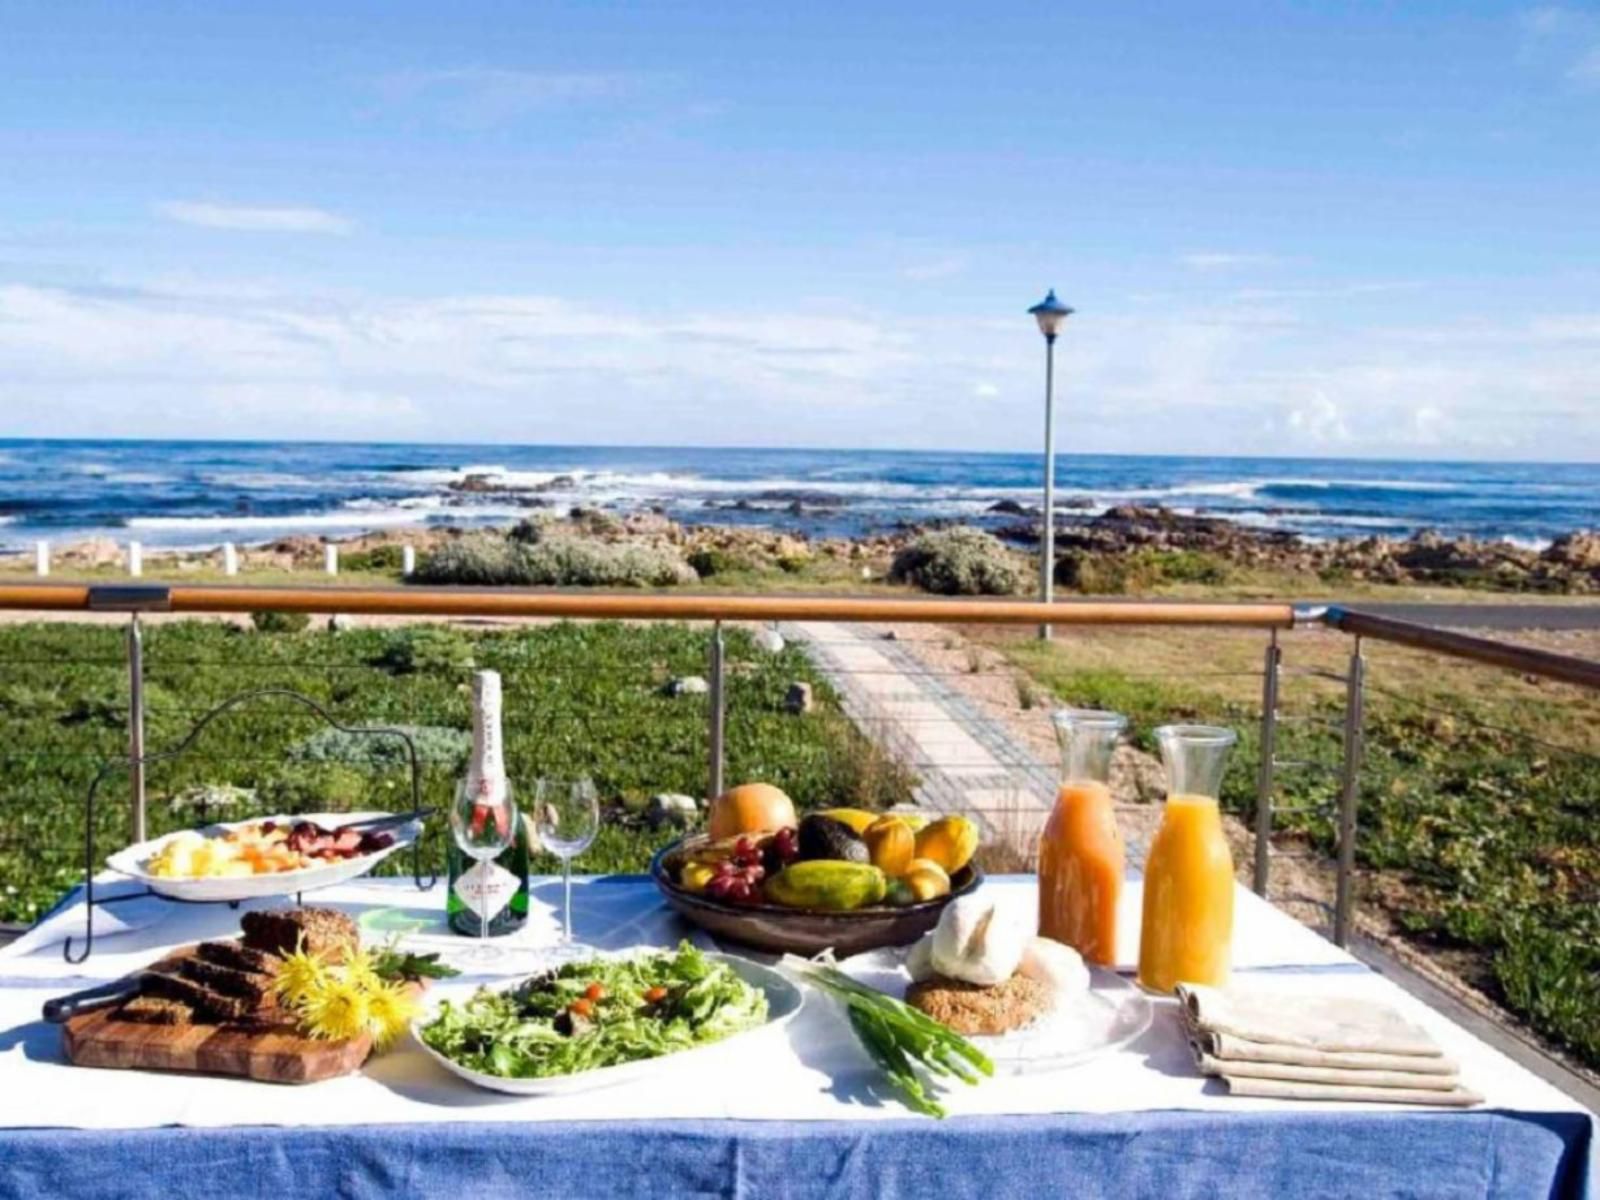 138 Marine Beachfront Guest House Sandbaai Hermanus Western Cape South Africa Complementary Colors, Beach, Nature, Sand, Place Cover, Food, Salad, Dish